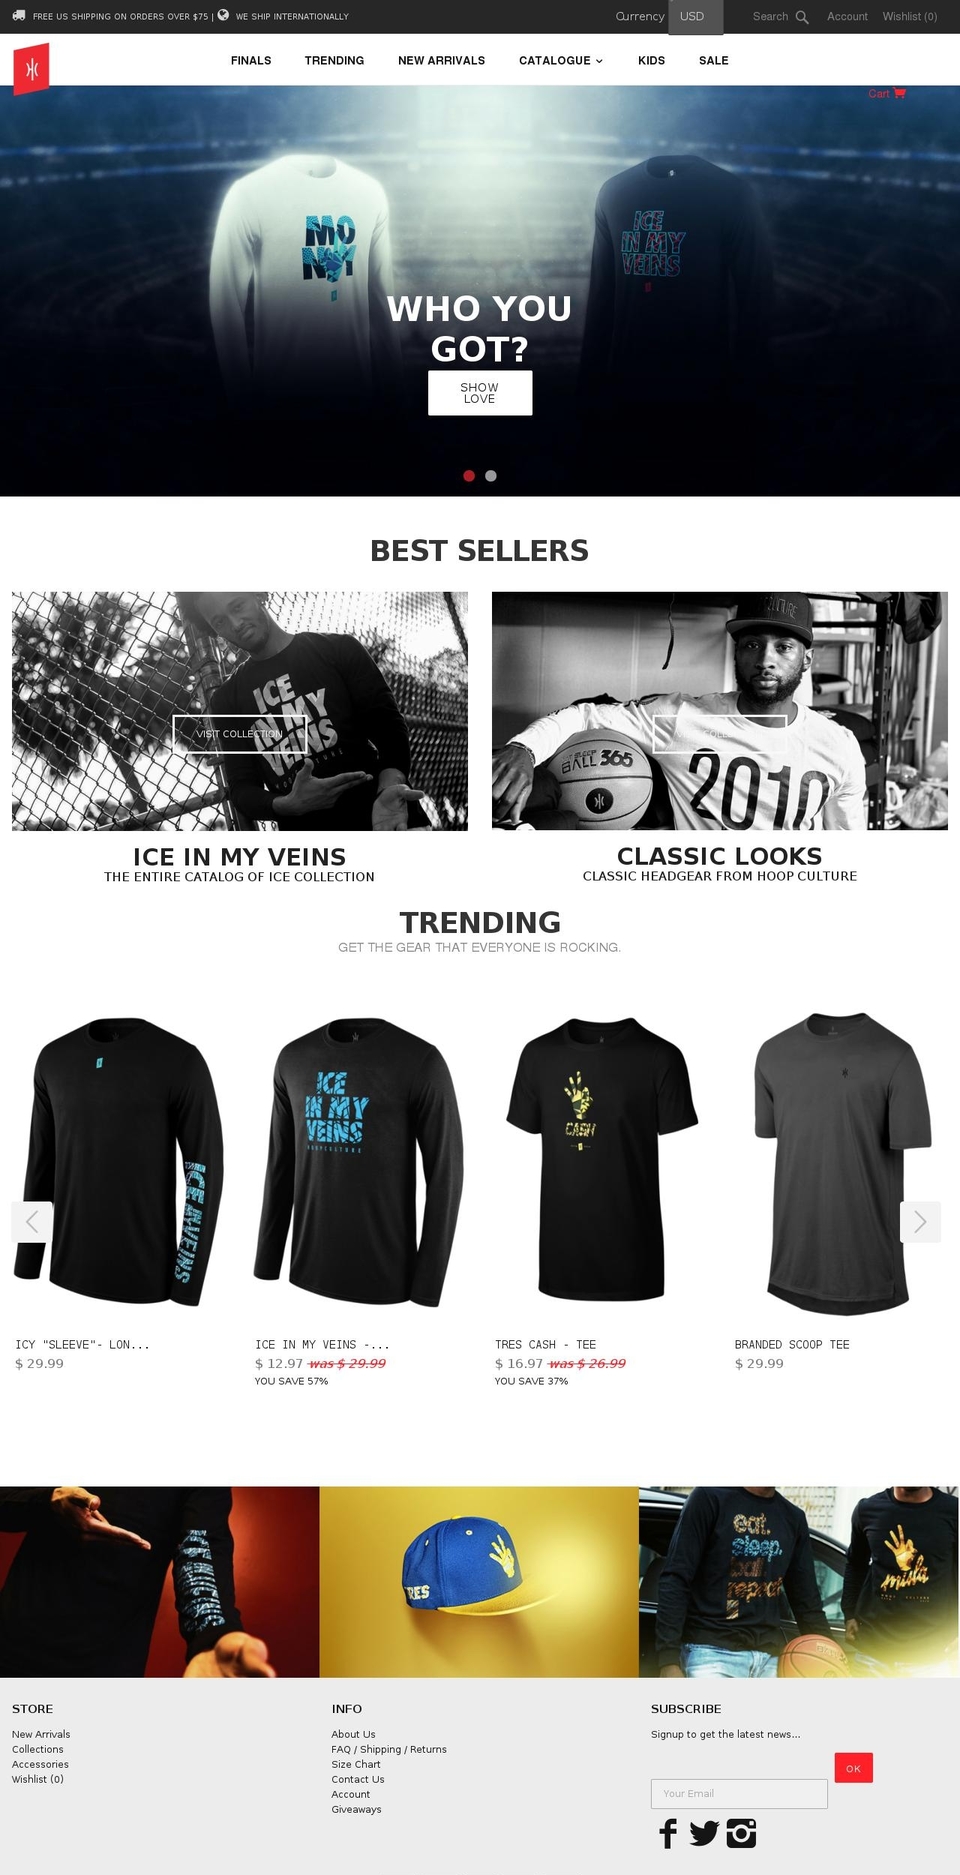 Opus Q Shopify theme site example hoopculture.com